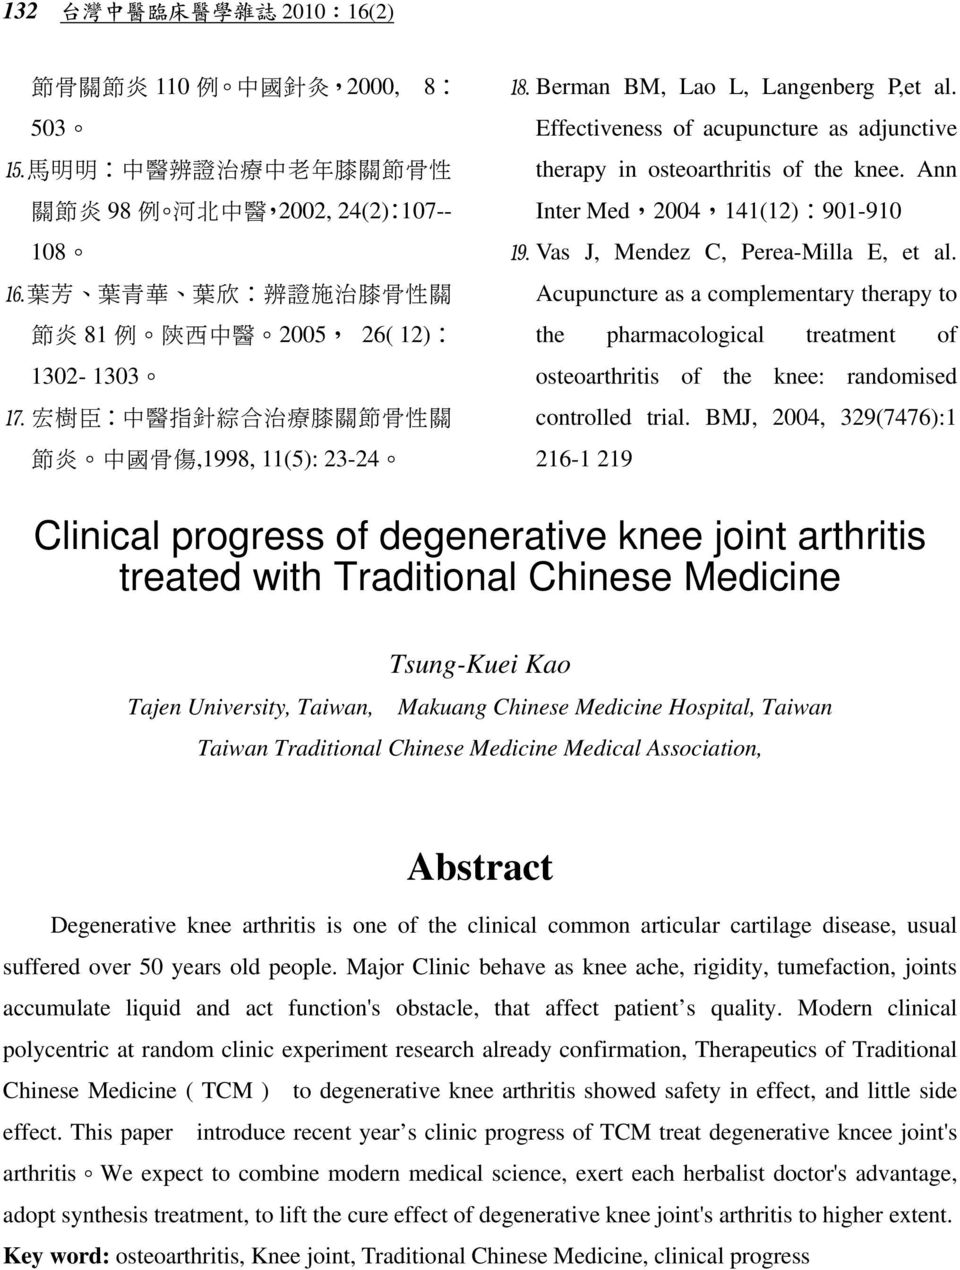 Effectiveness of acupuncture as adjunctive therapy in osteoarthritis of the knee. Ann Inter Med,2004,141(12):901-910 Vas J, Mendez C, Perea-Milla E, et al.